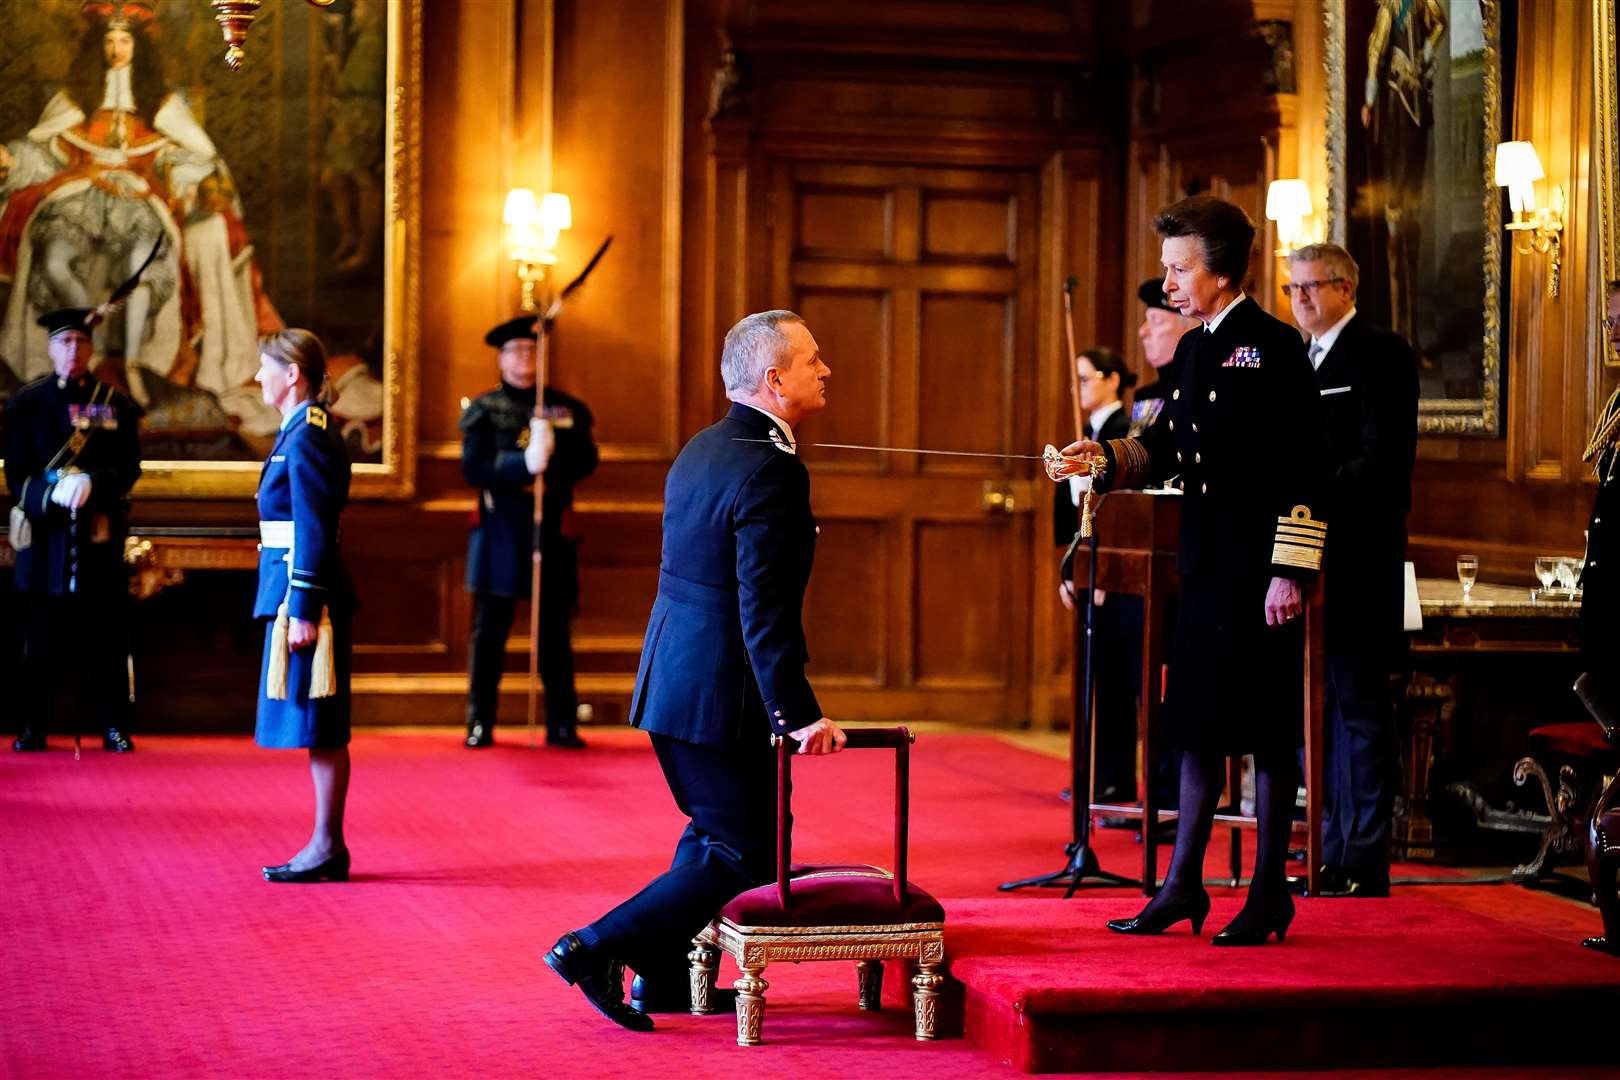 Sir Iain Livingstone is knighted by the Princess Royal (Aaron Chown/PA)